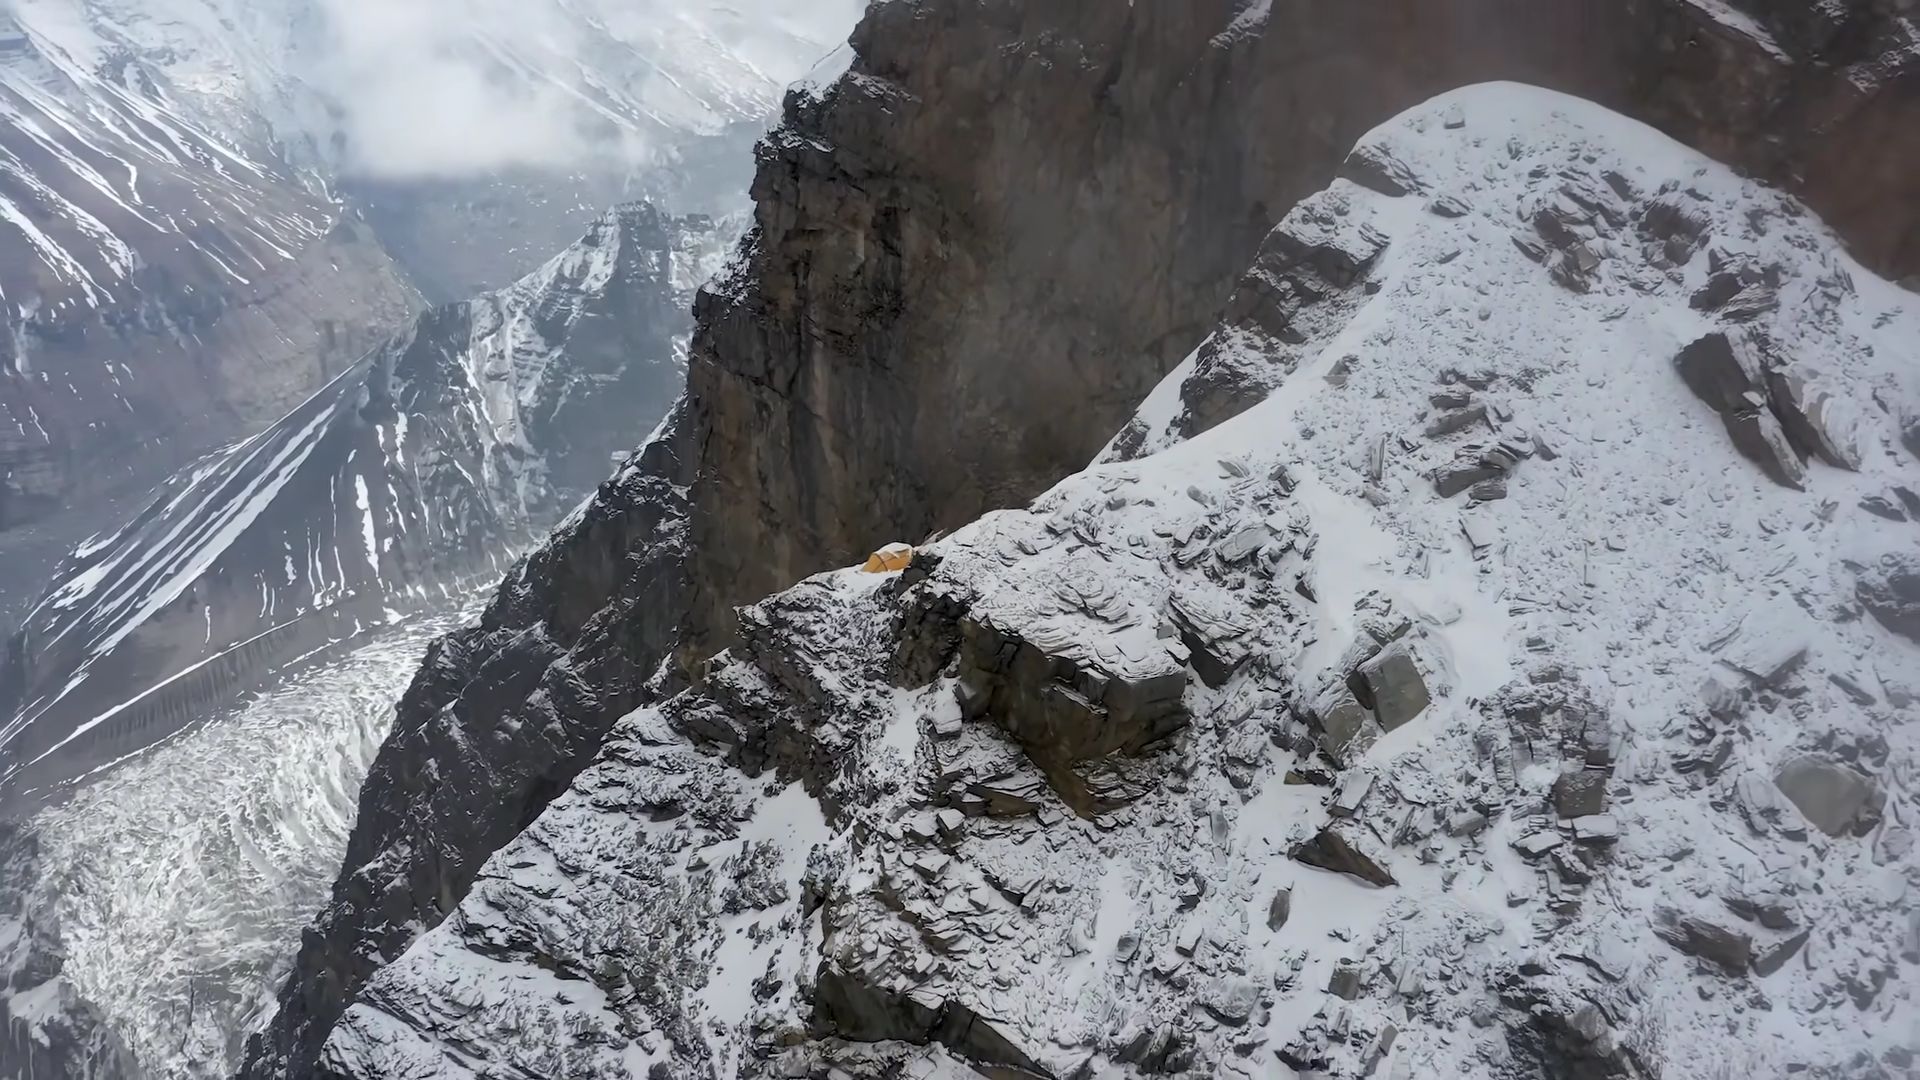 Watch: Struggle and Strength, on the World's 7th Highest Mountain